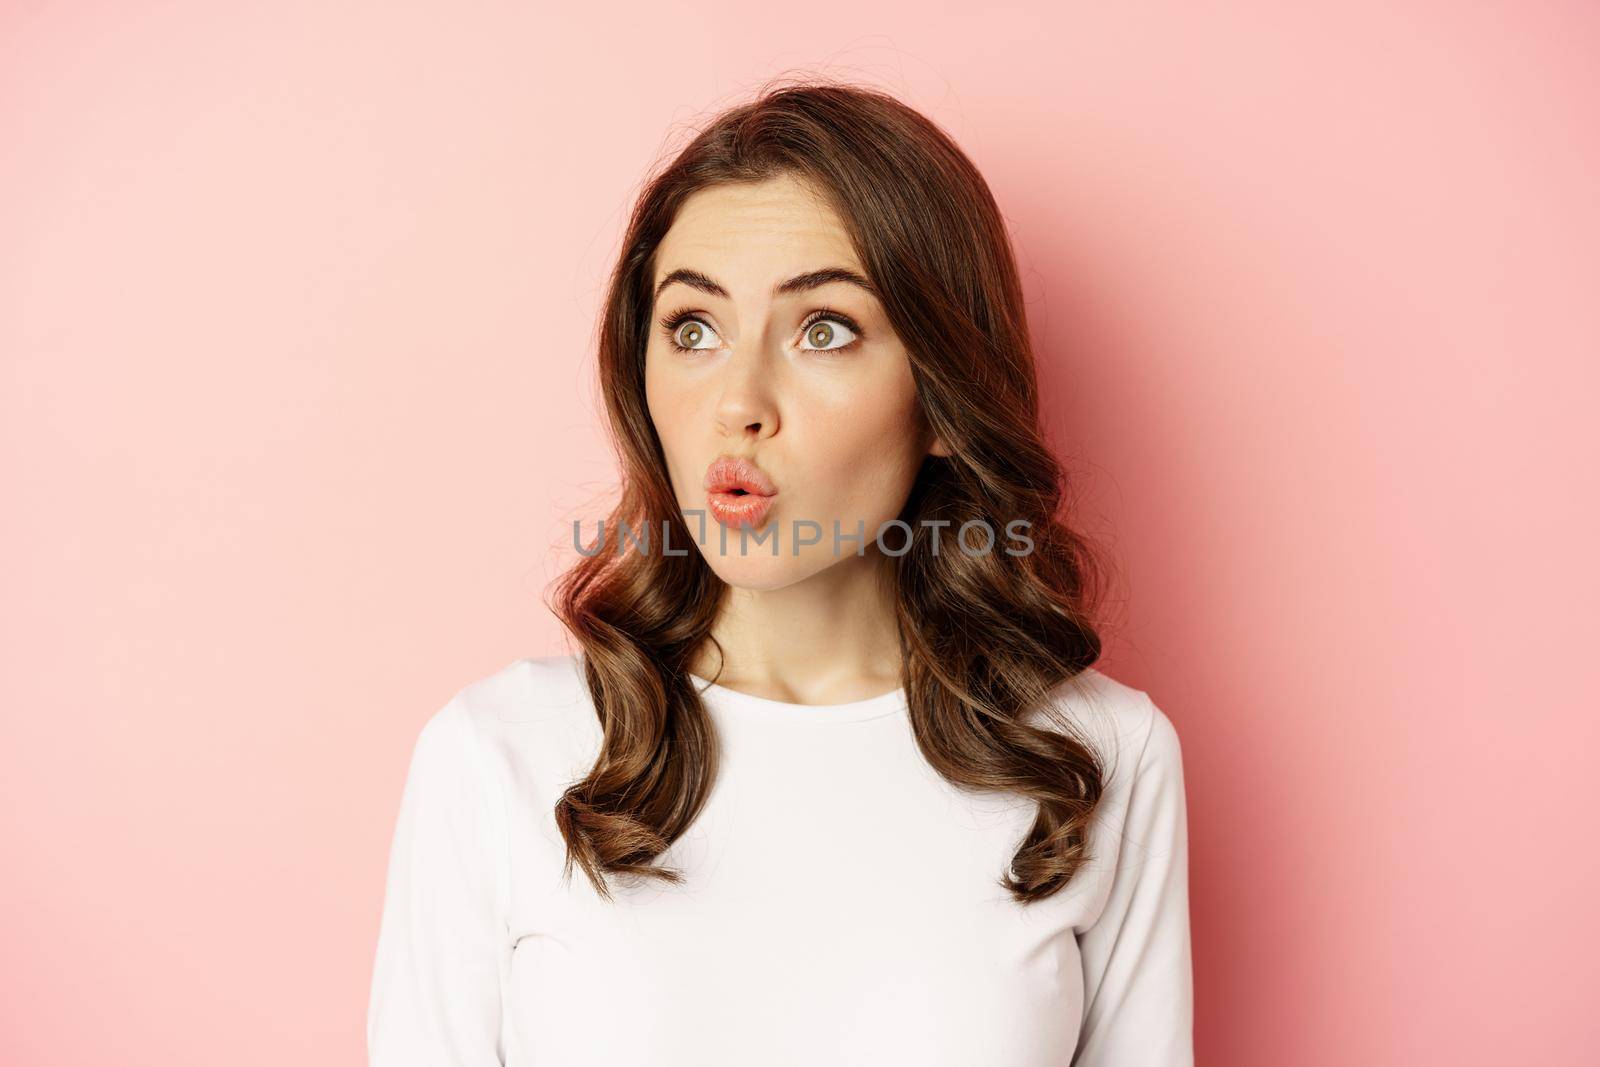 Image of stylish glamour woman looking surprised and amazed, saying wow with impressed reaction, standing over pink background.